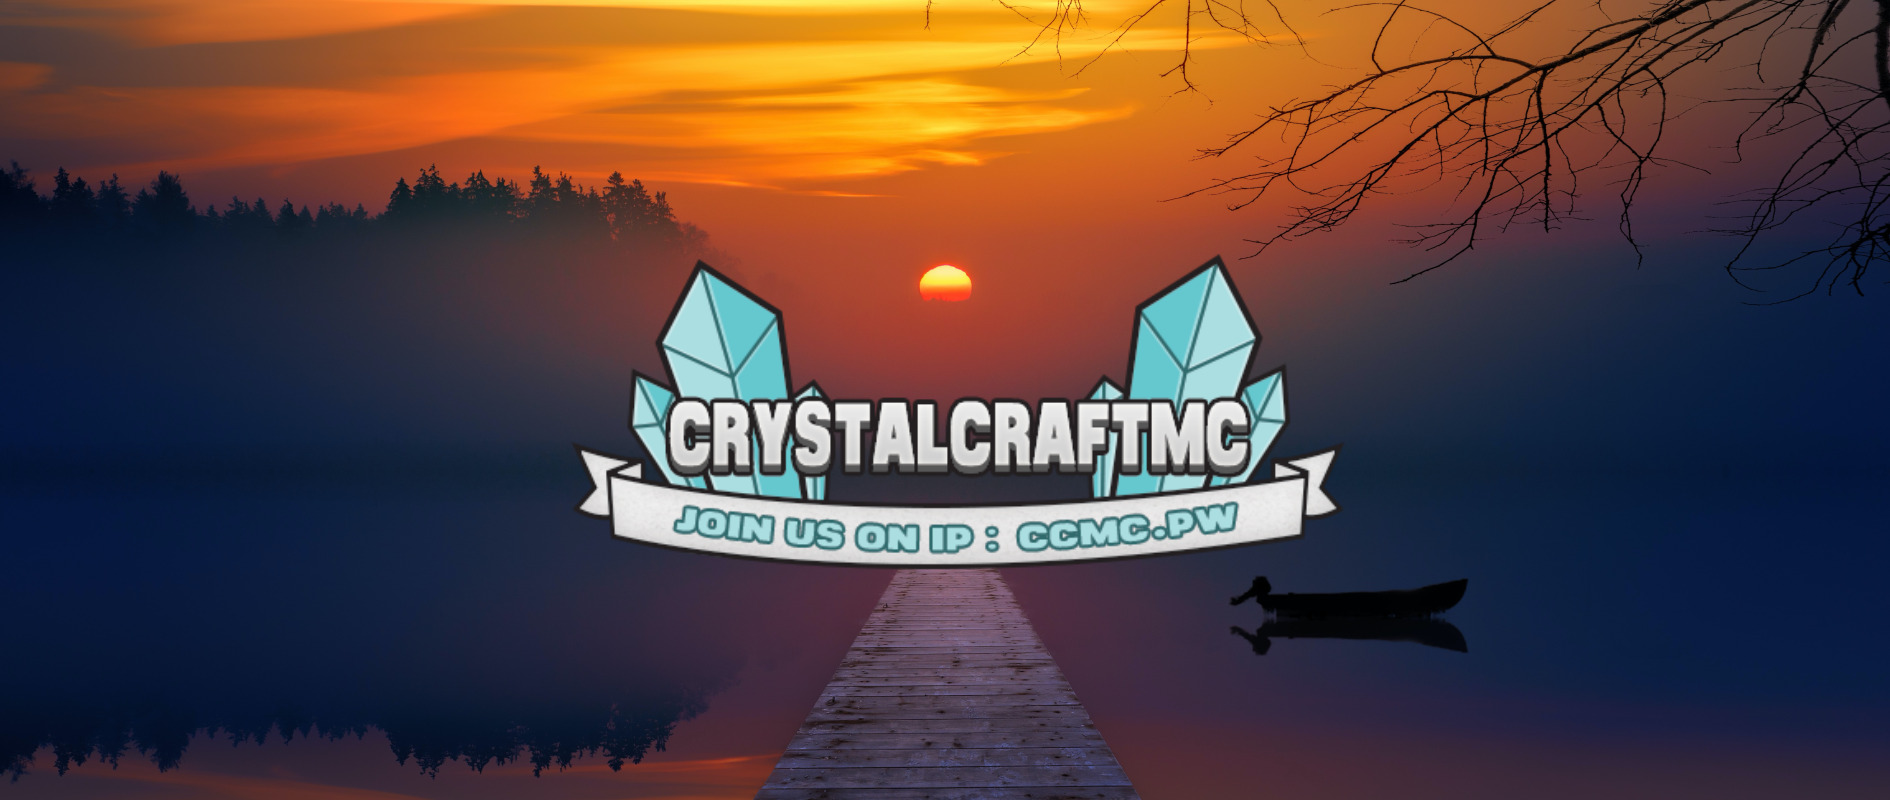 CrystalCraftMC forums sunset. The background picture shows a lake with the sun setting over it. The CrystalCraftMC forum logo appears in the center, slightly below the setting sun.